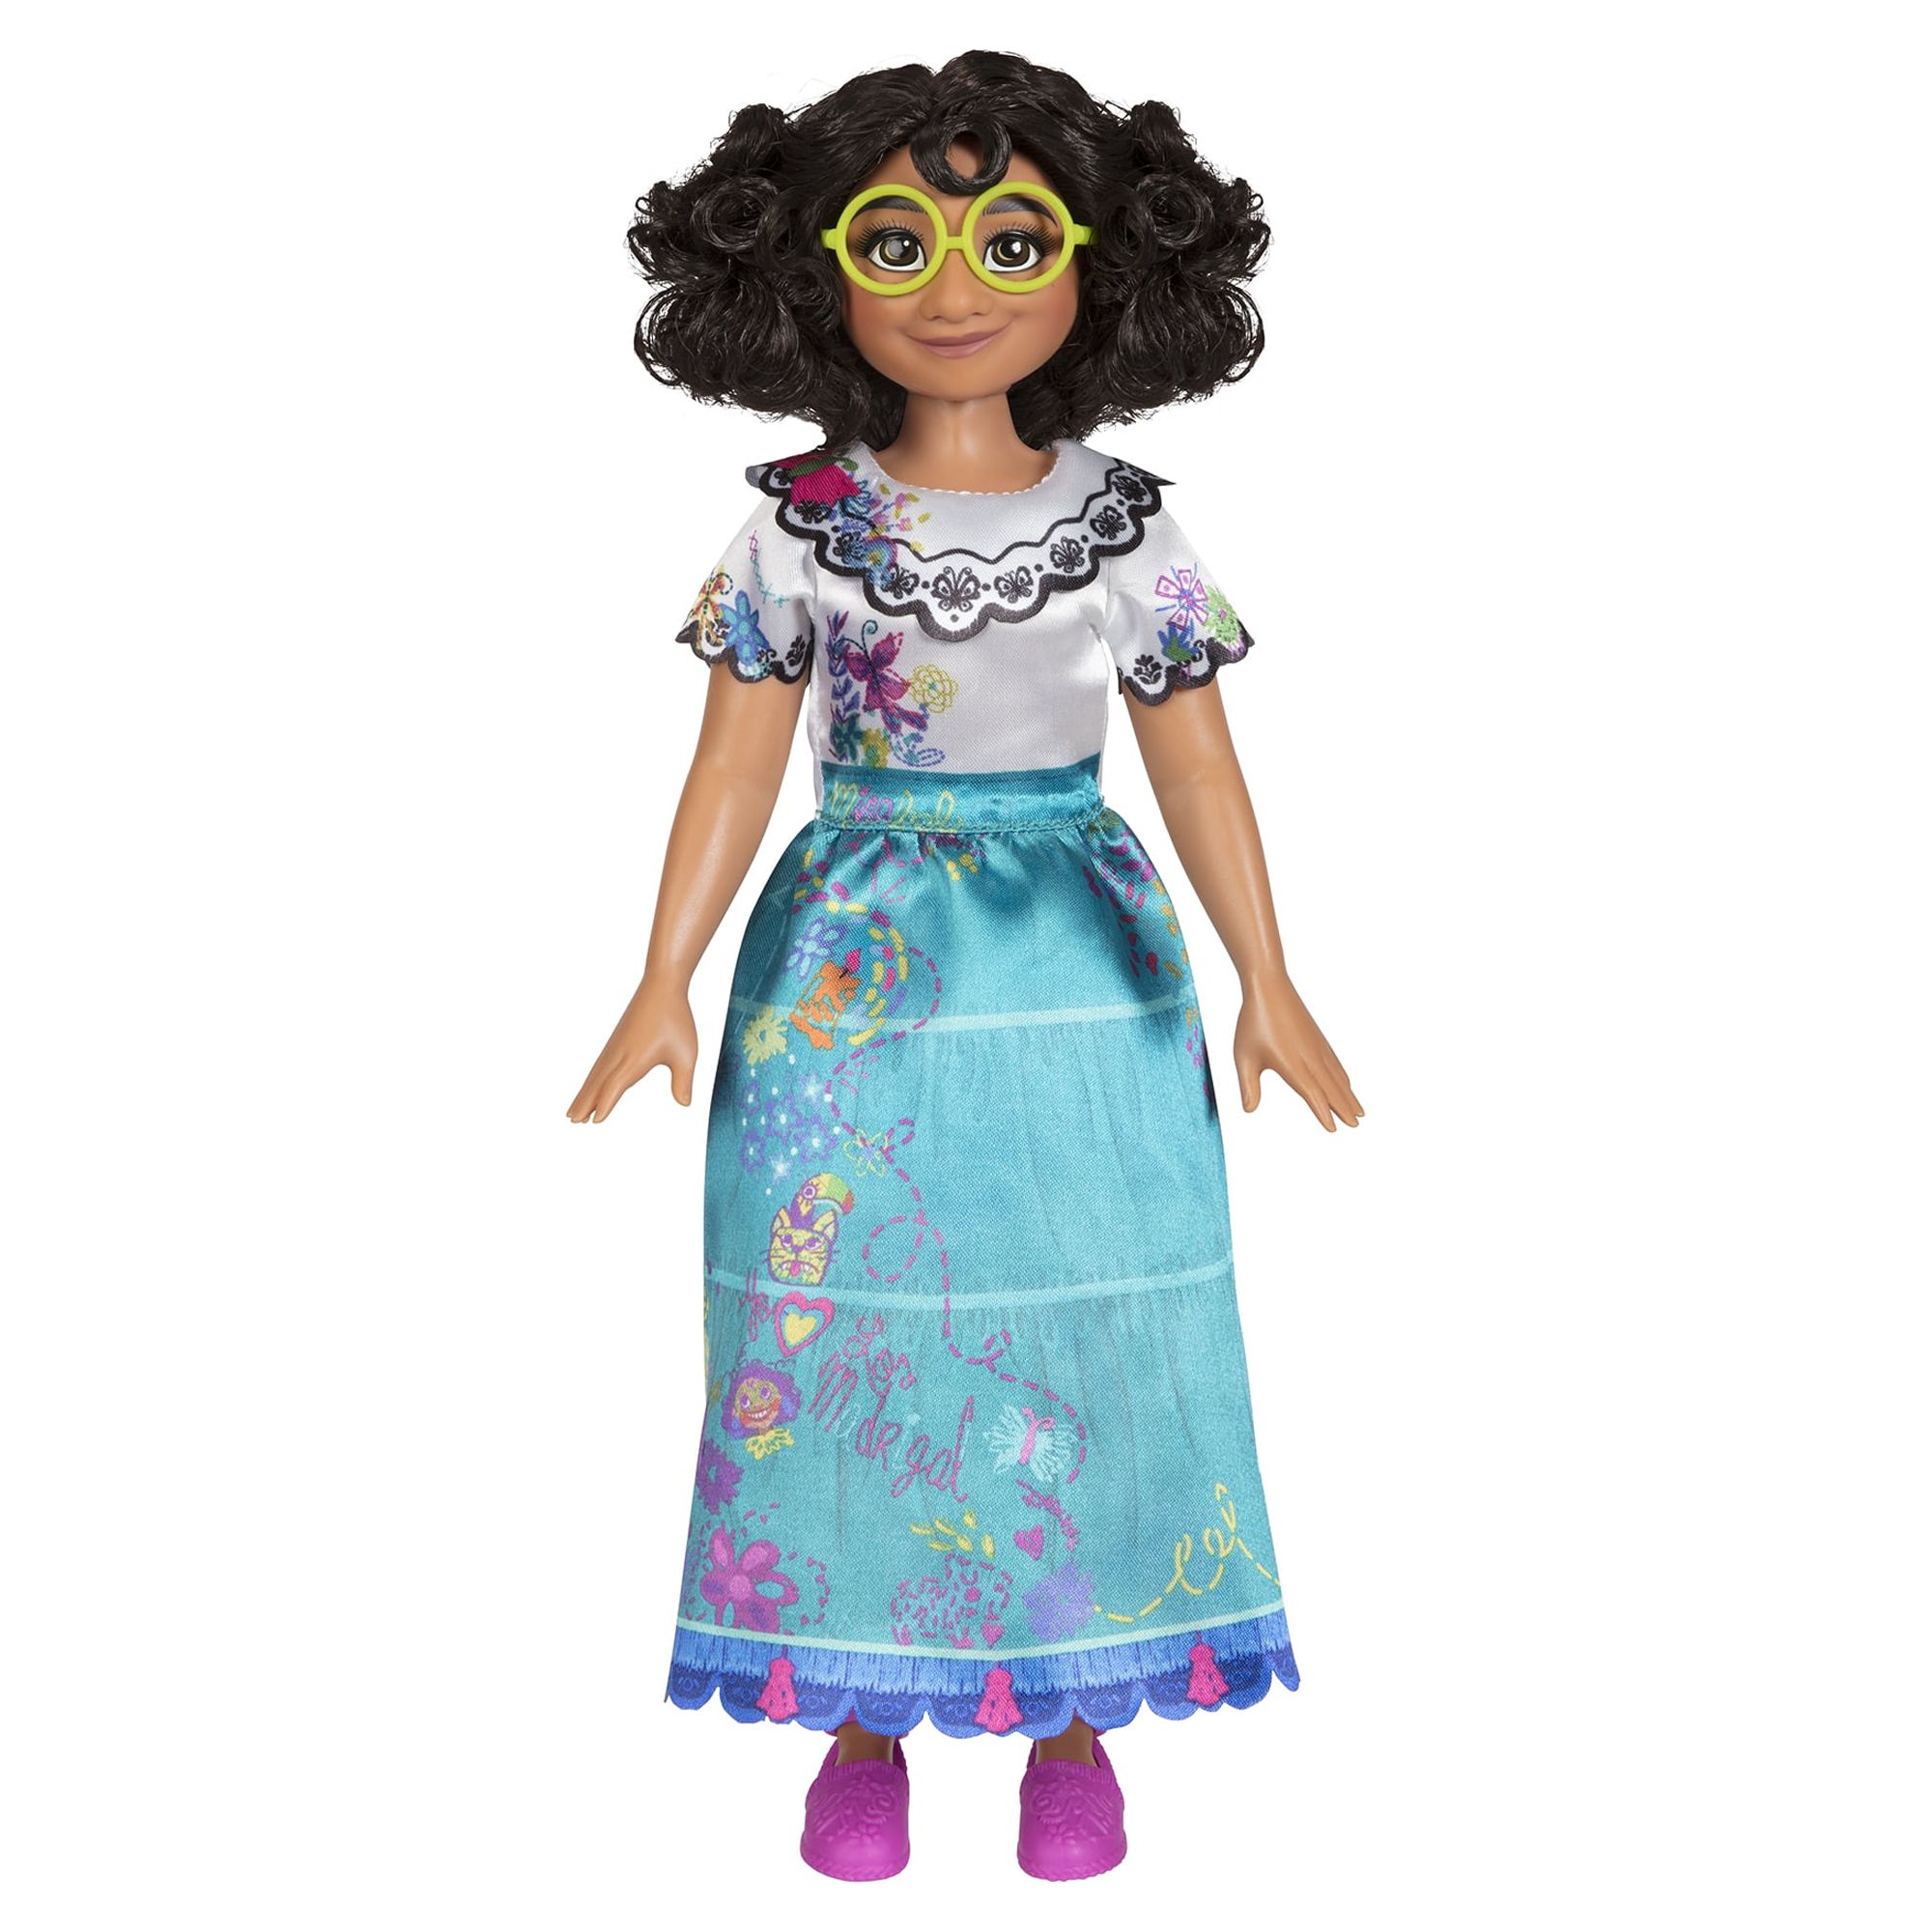 Disney Encanto Mirabel 11 inch Fashion Doll Includes Dress, Shoes and Clip, for Children Ages 3+ - image 1 of 6